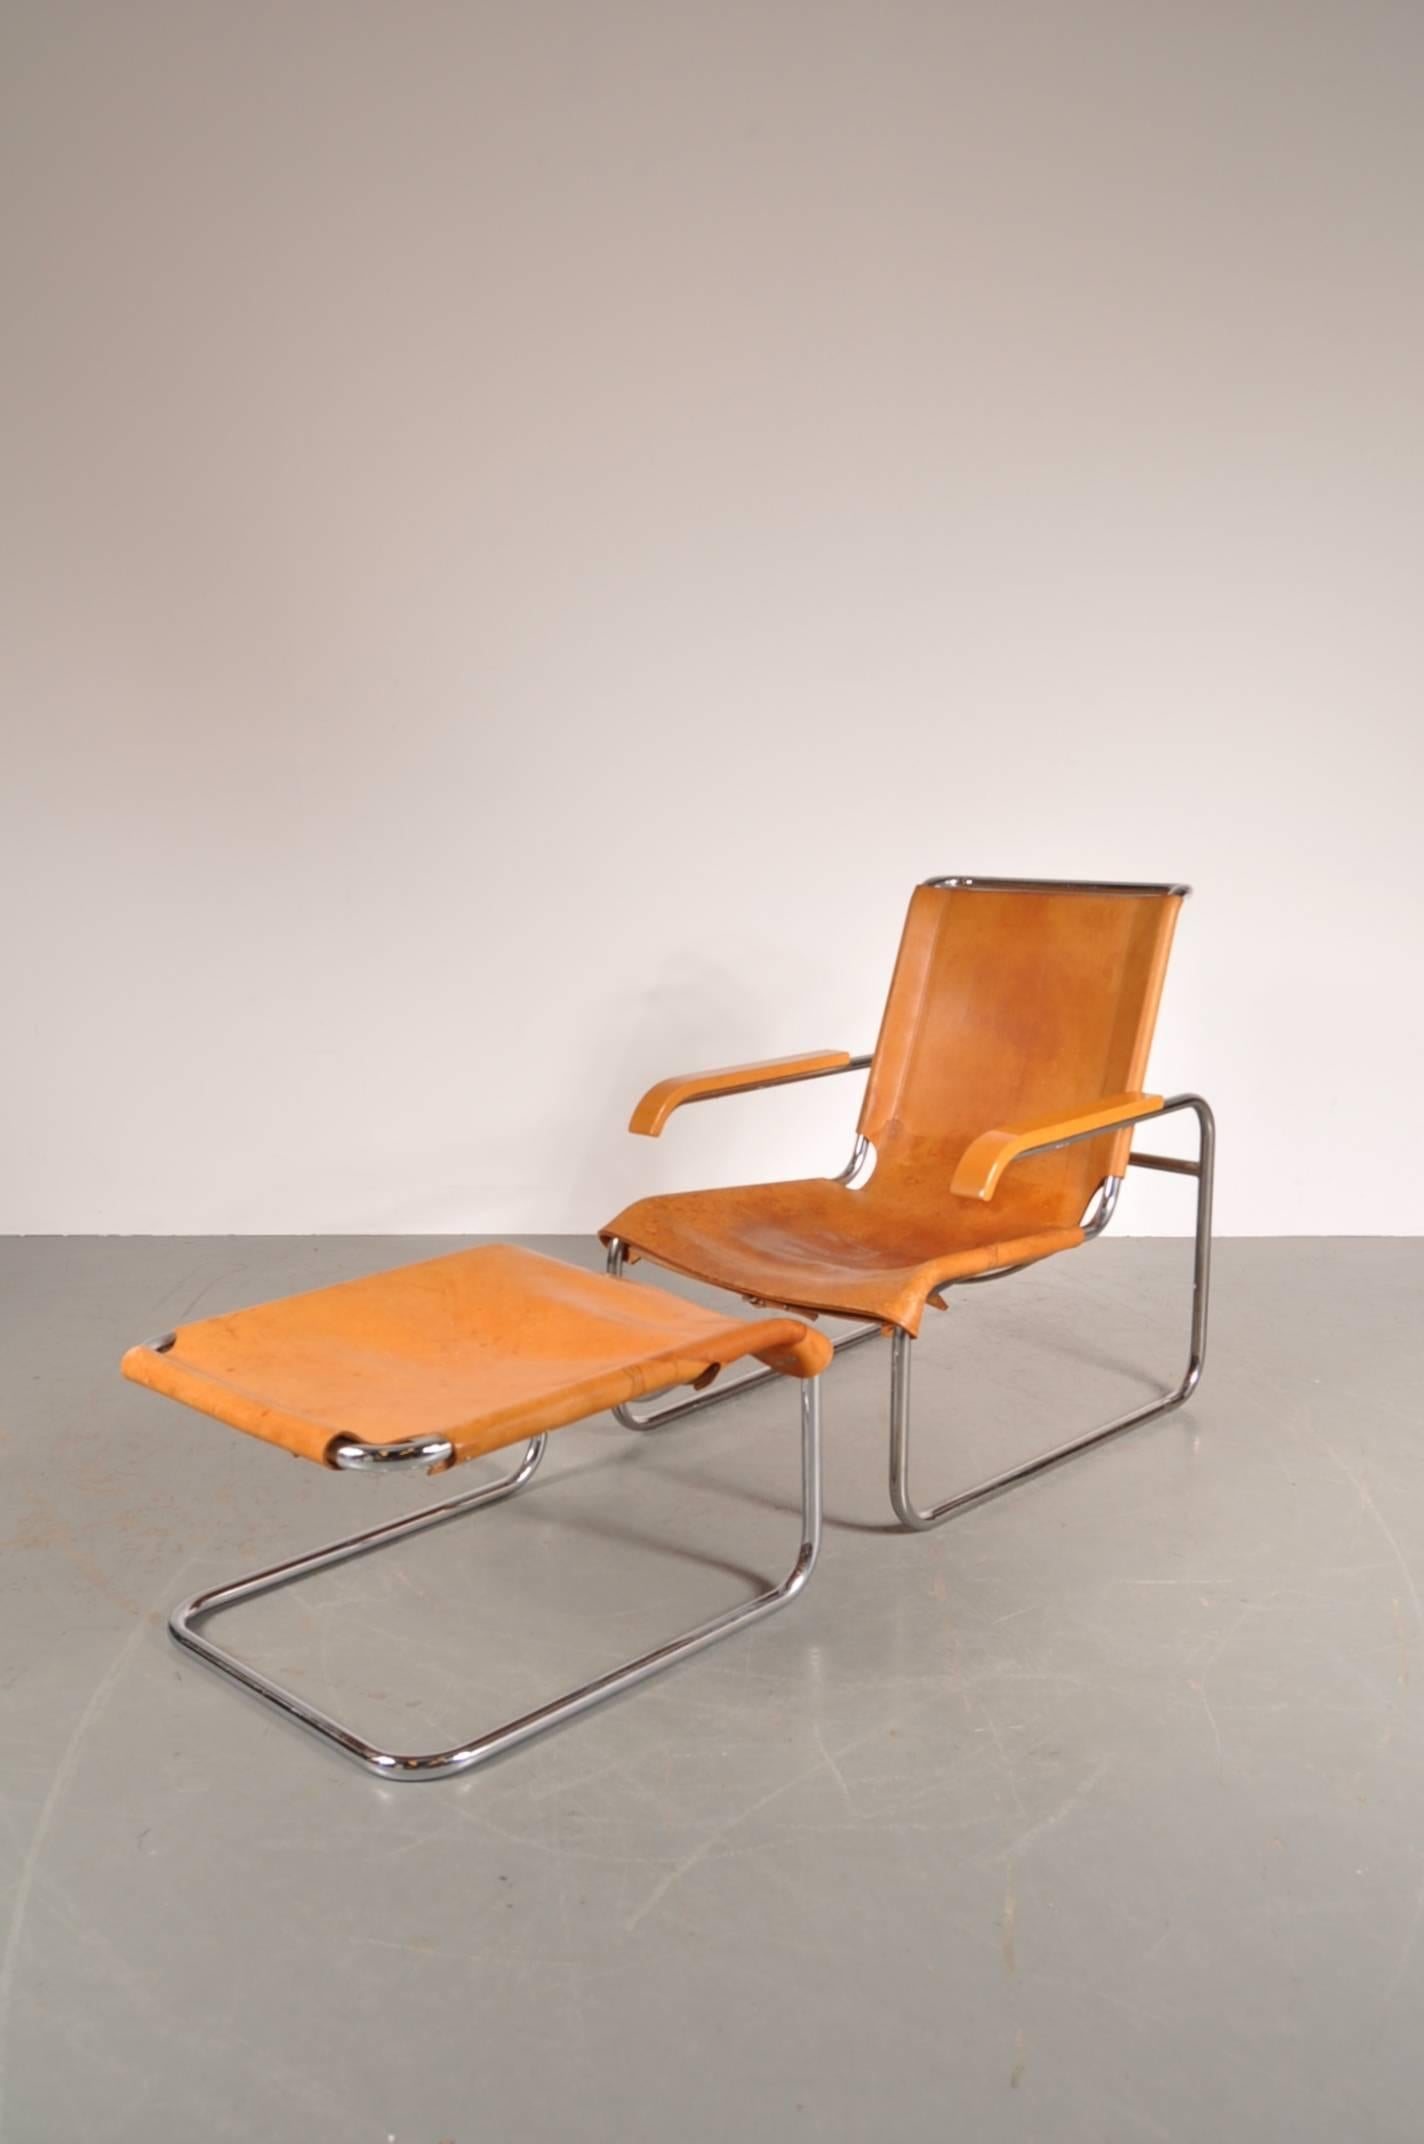 Beautiful lounge chair model B35 with rare matching ottoman / foot stool, designed by Marcel Breuer, manufactured by Thonet in Germany, circa 1920.

This very appealing set is made of high quality cognac saddle leather on a pipe frame metal base.